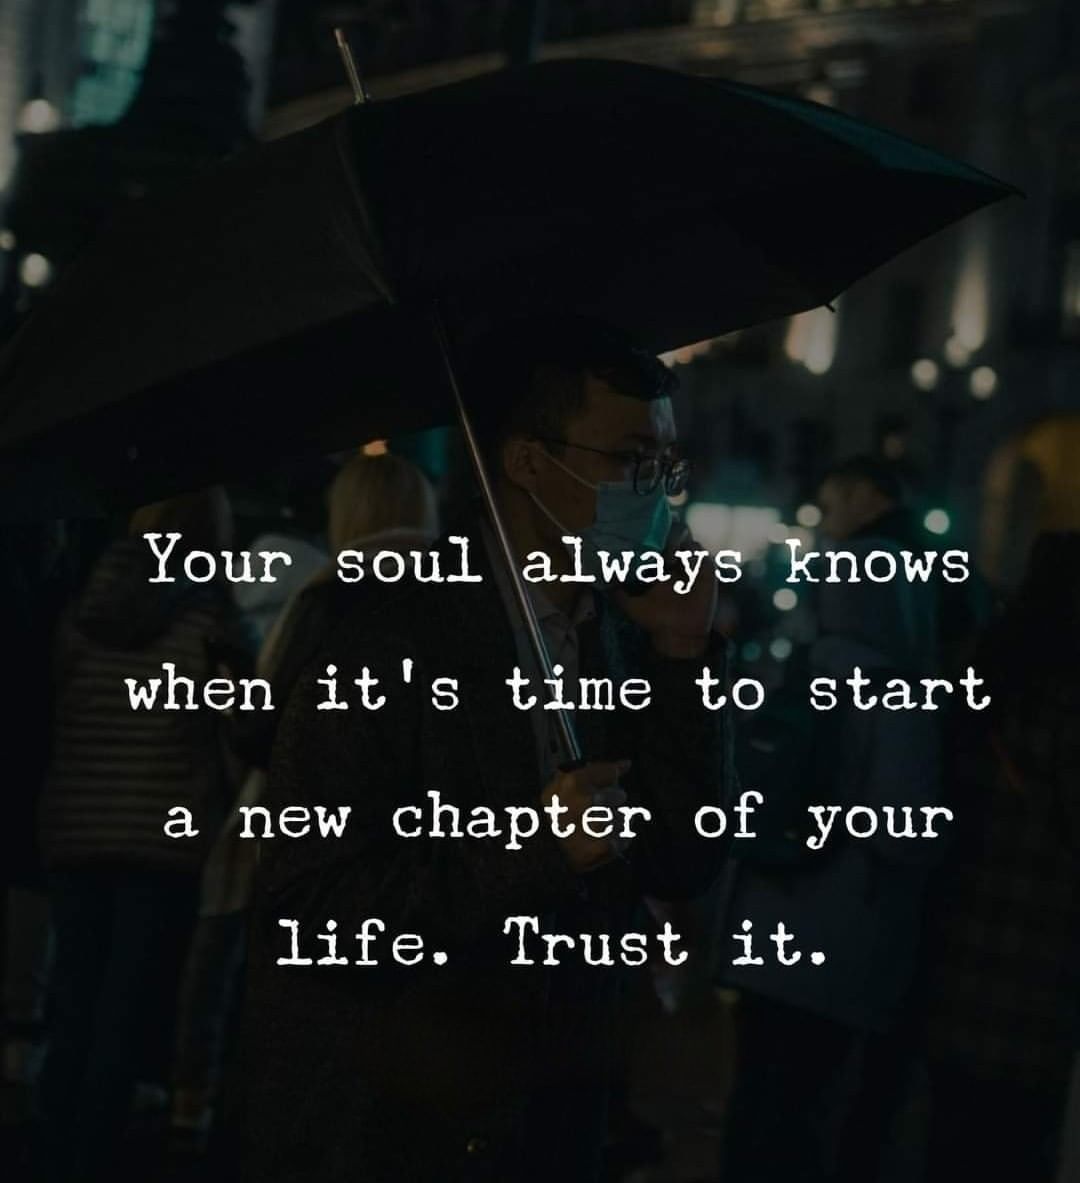 Your soul always knows when it's time to start a new chapter of your life. Trust it.